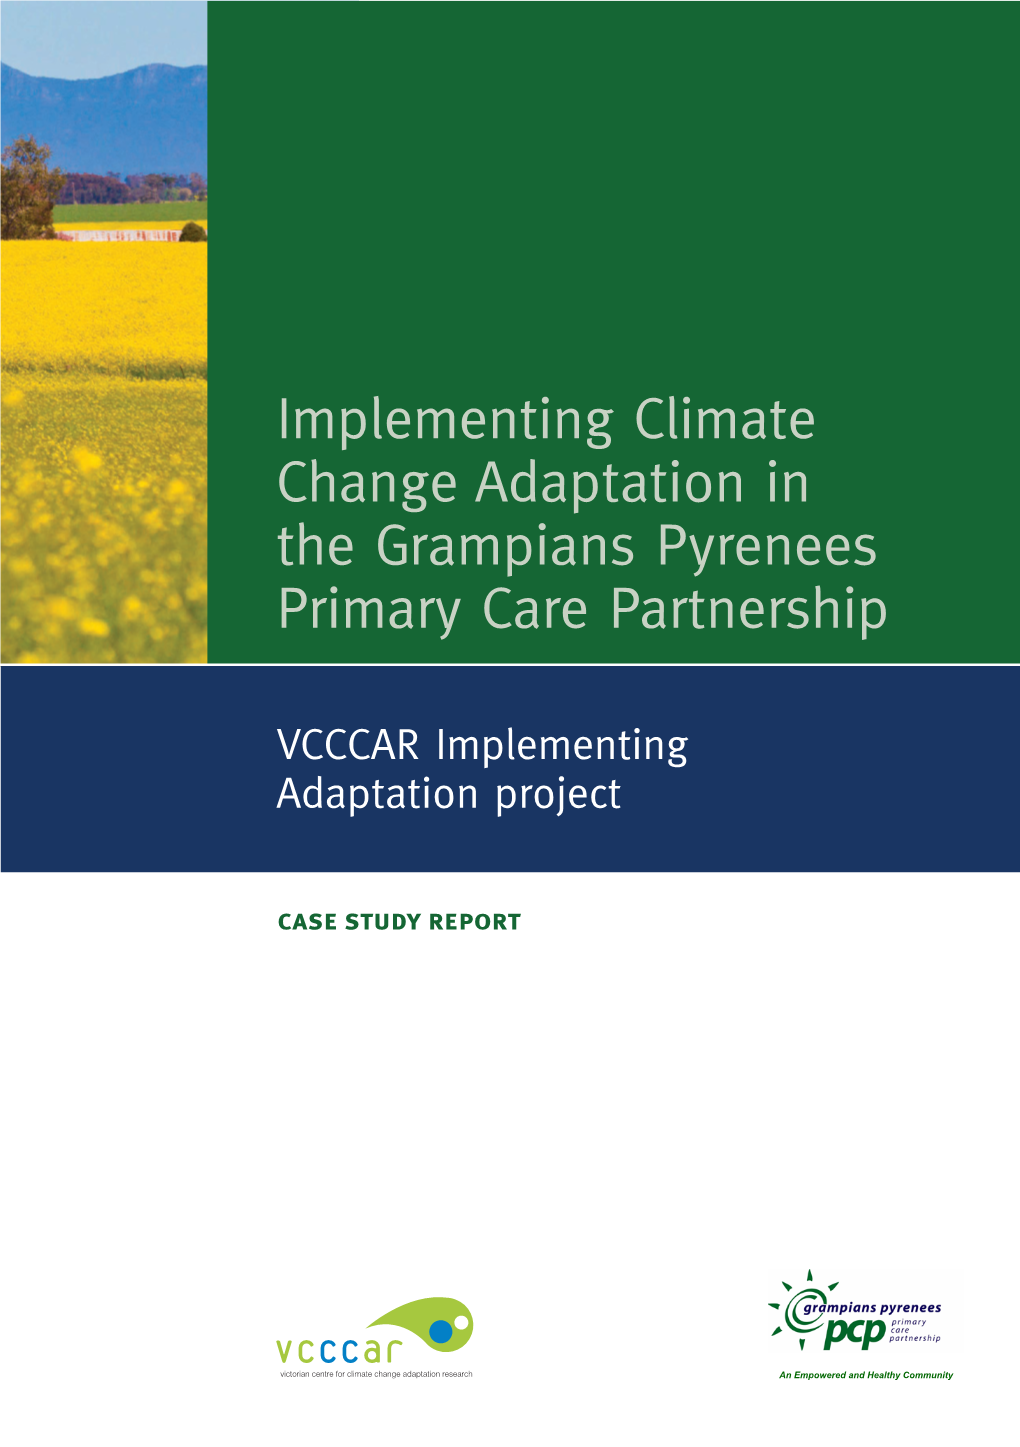 Implementing Climate Change Adaptation in the Grampians Pyrenees Primary Care Partnership